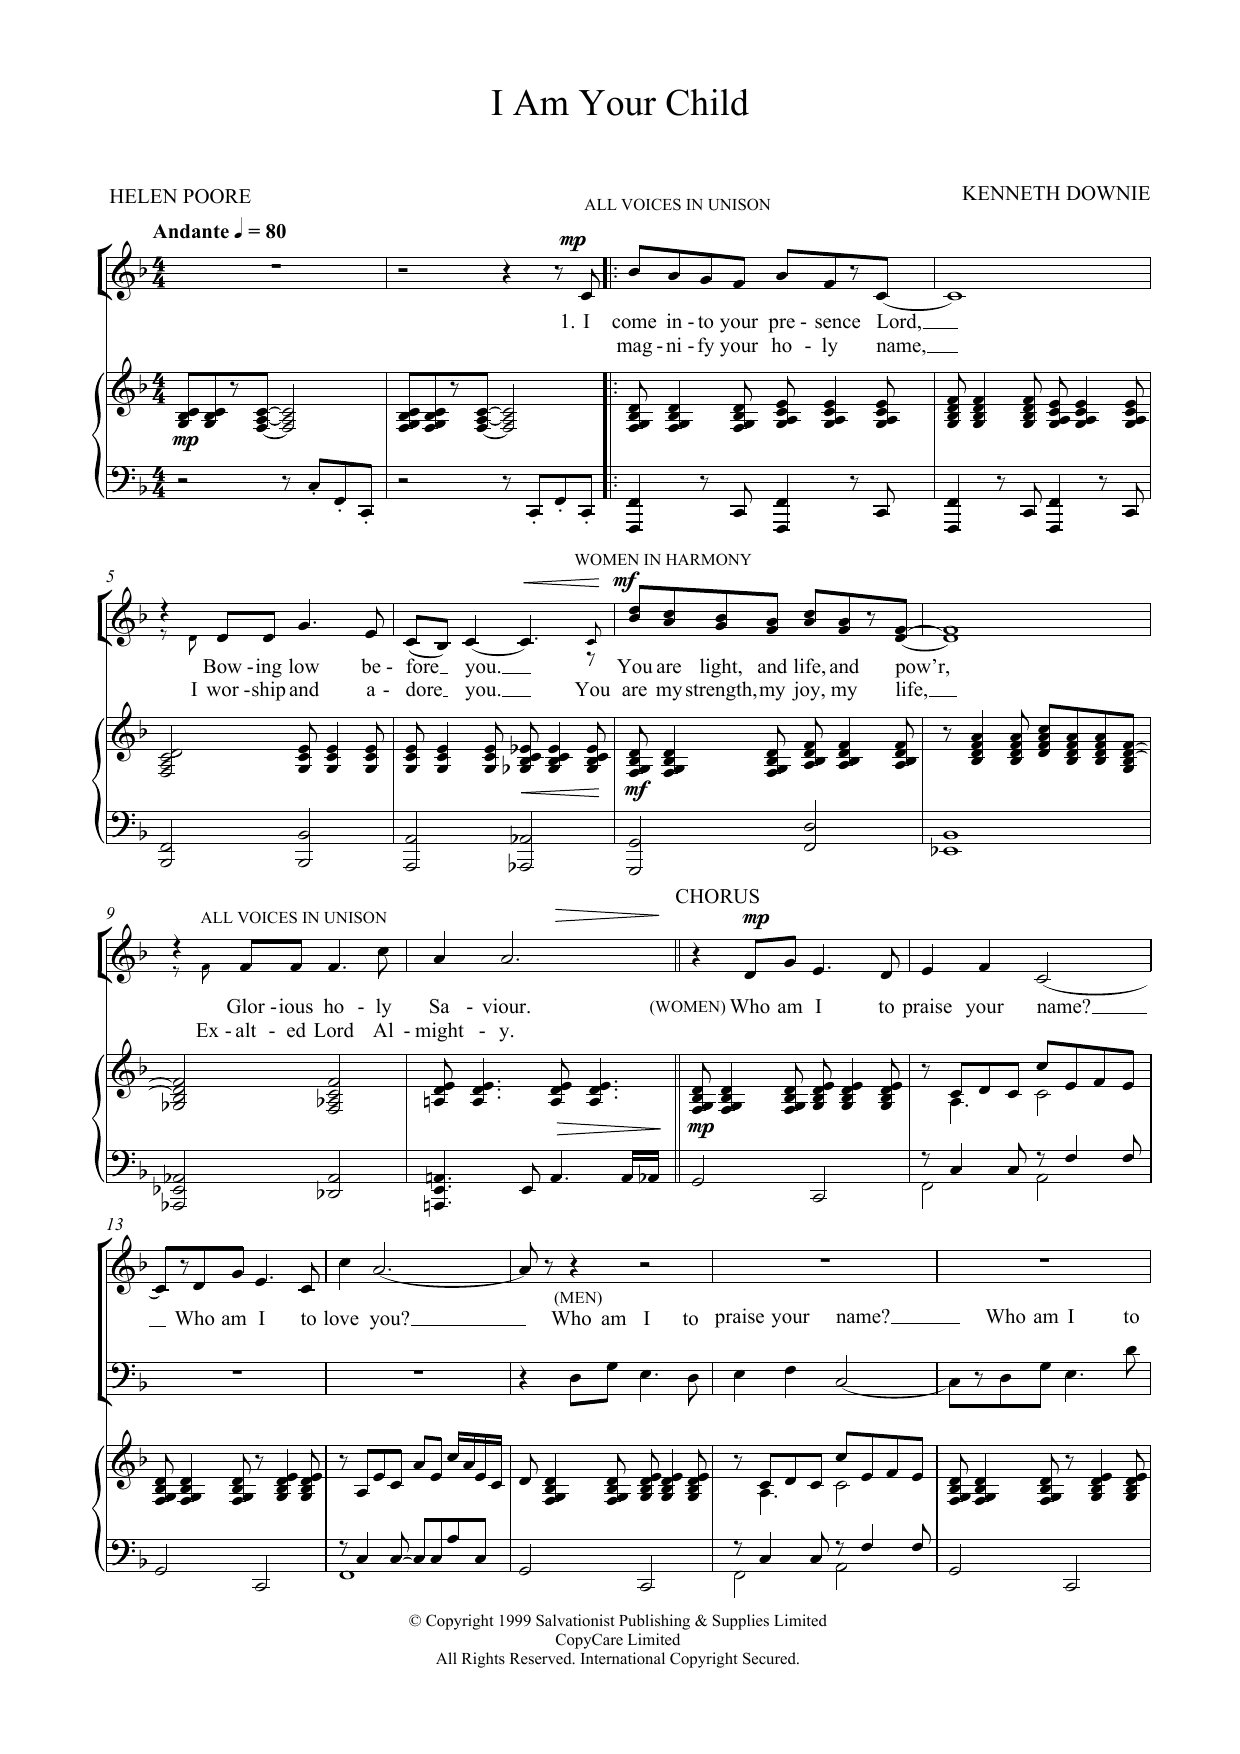 Download The Salvation Army I Am Your Child Sheet Music